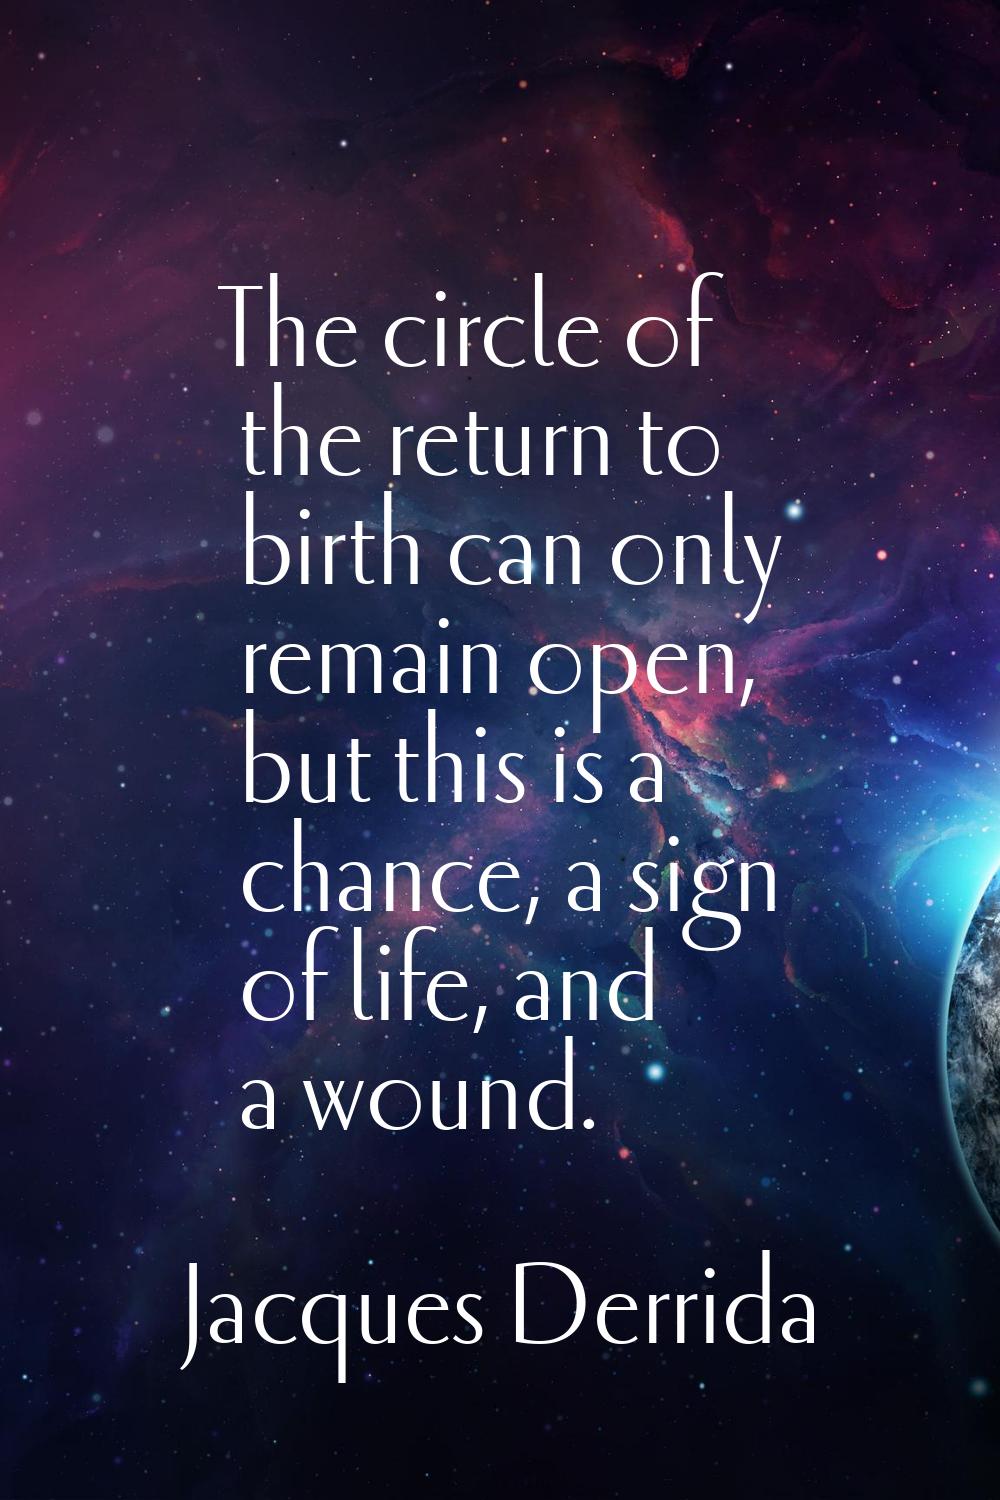 The circle of the return to birth can only remain open, but this is a chance, a sign of life, and a